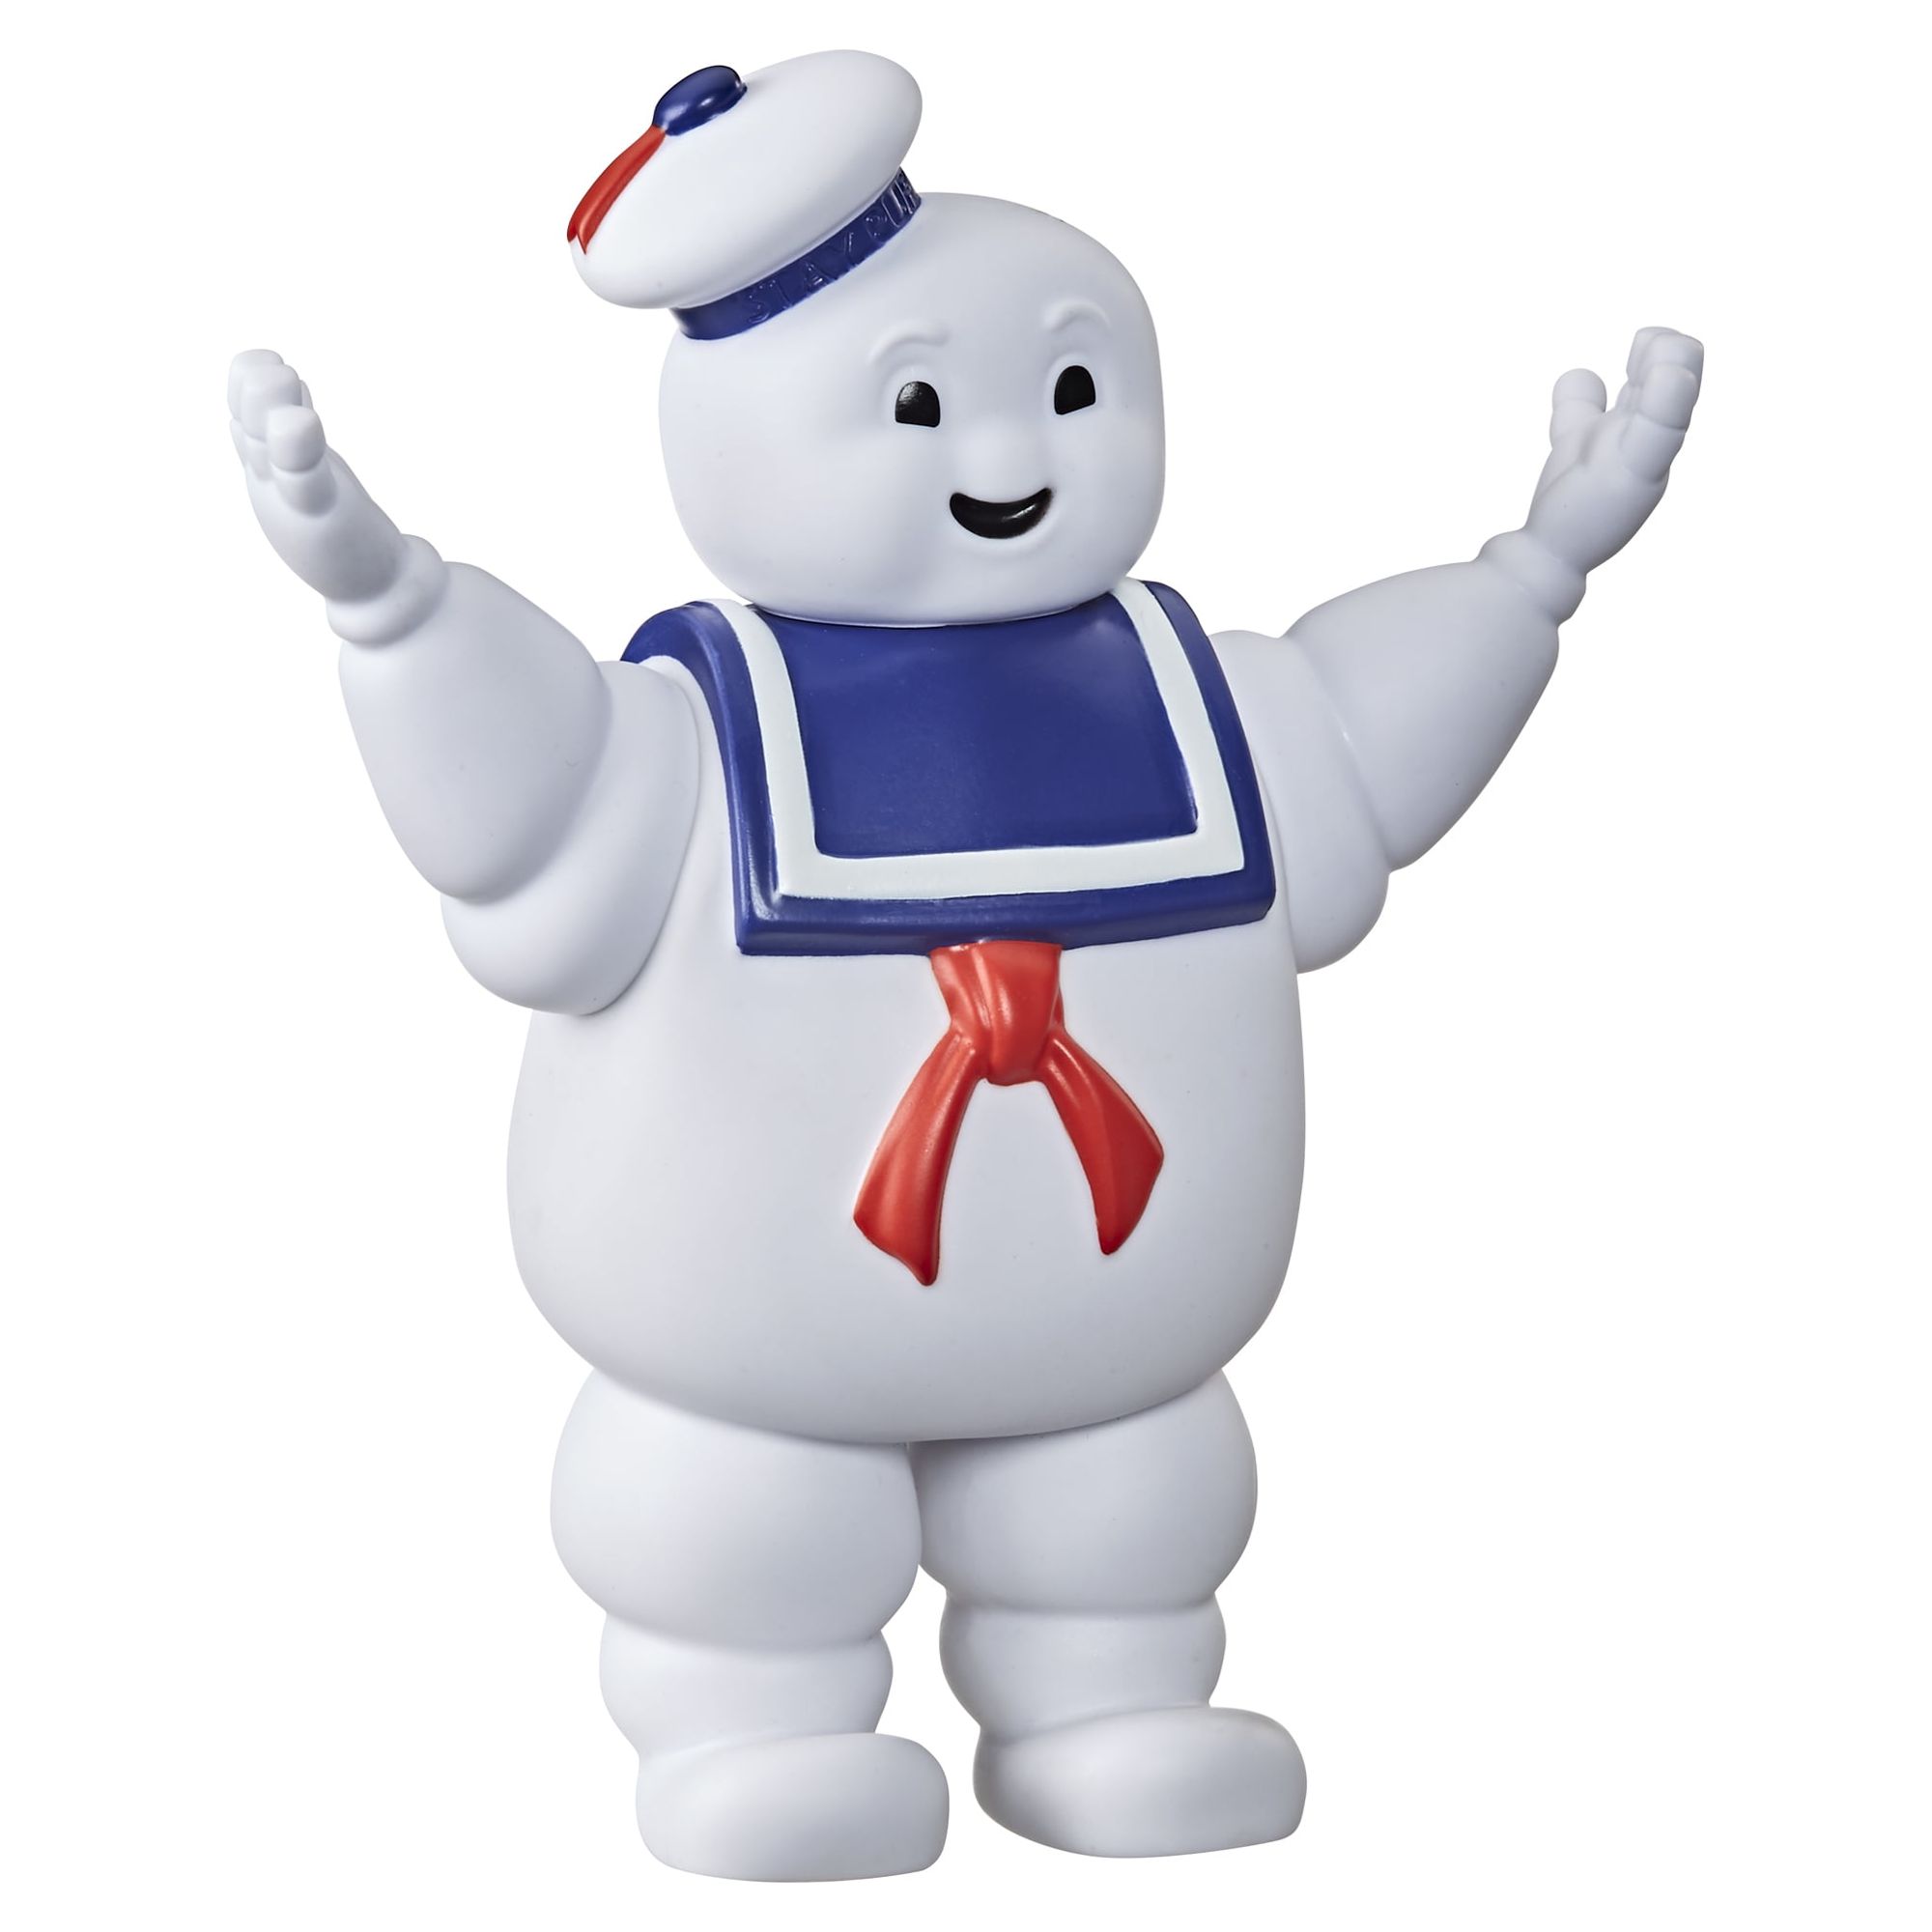 Ghostbusters Kenner Classics Stay-Puft Marshmallow Man - image 1 of 7